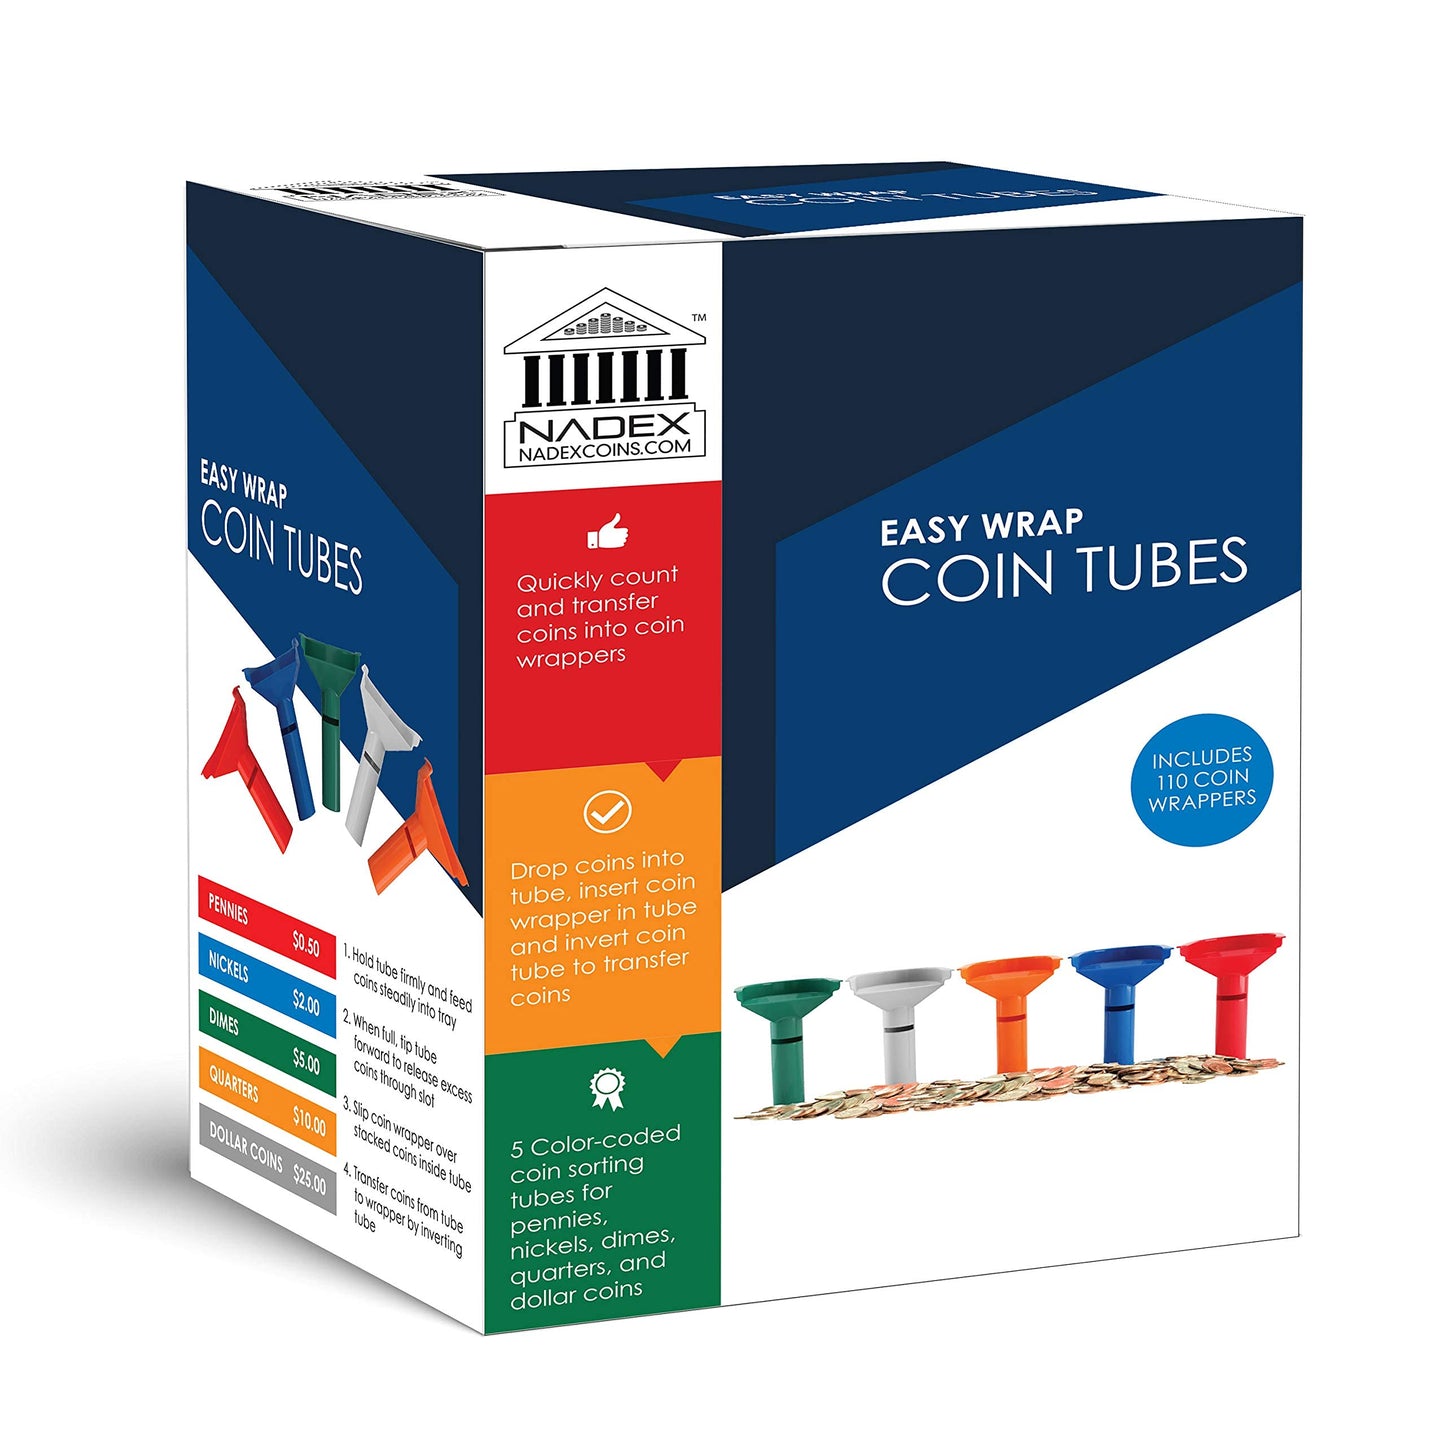 5 Easy Wrap Coin Tube Set with 110 Wrappers